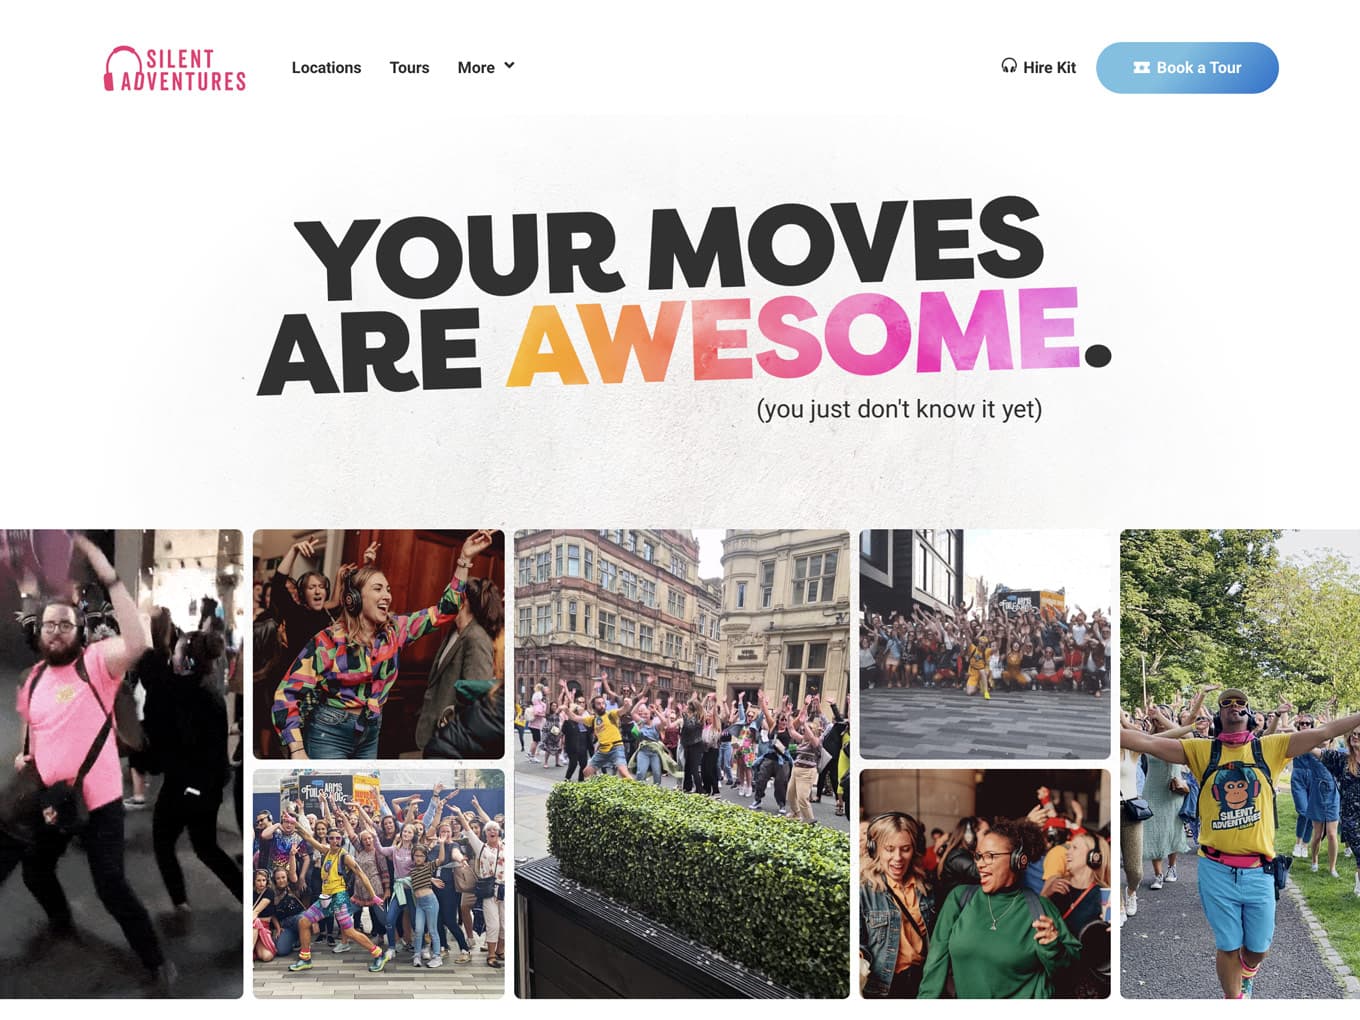 Silent Adventures, great tourism and tour operator website design